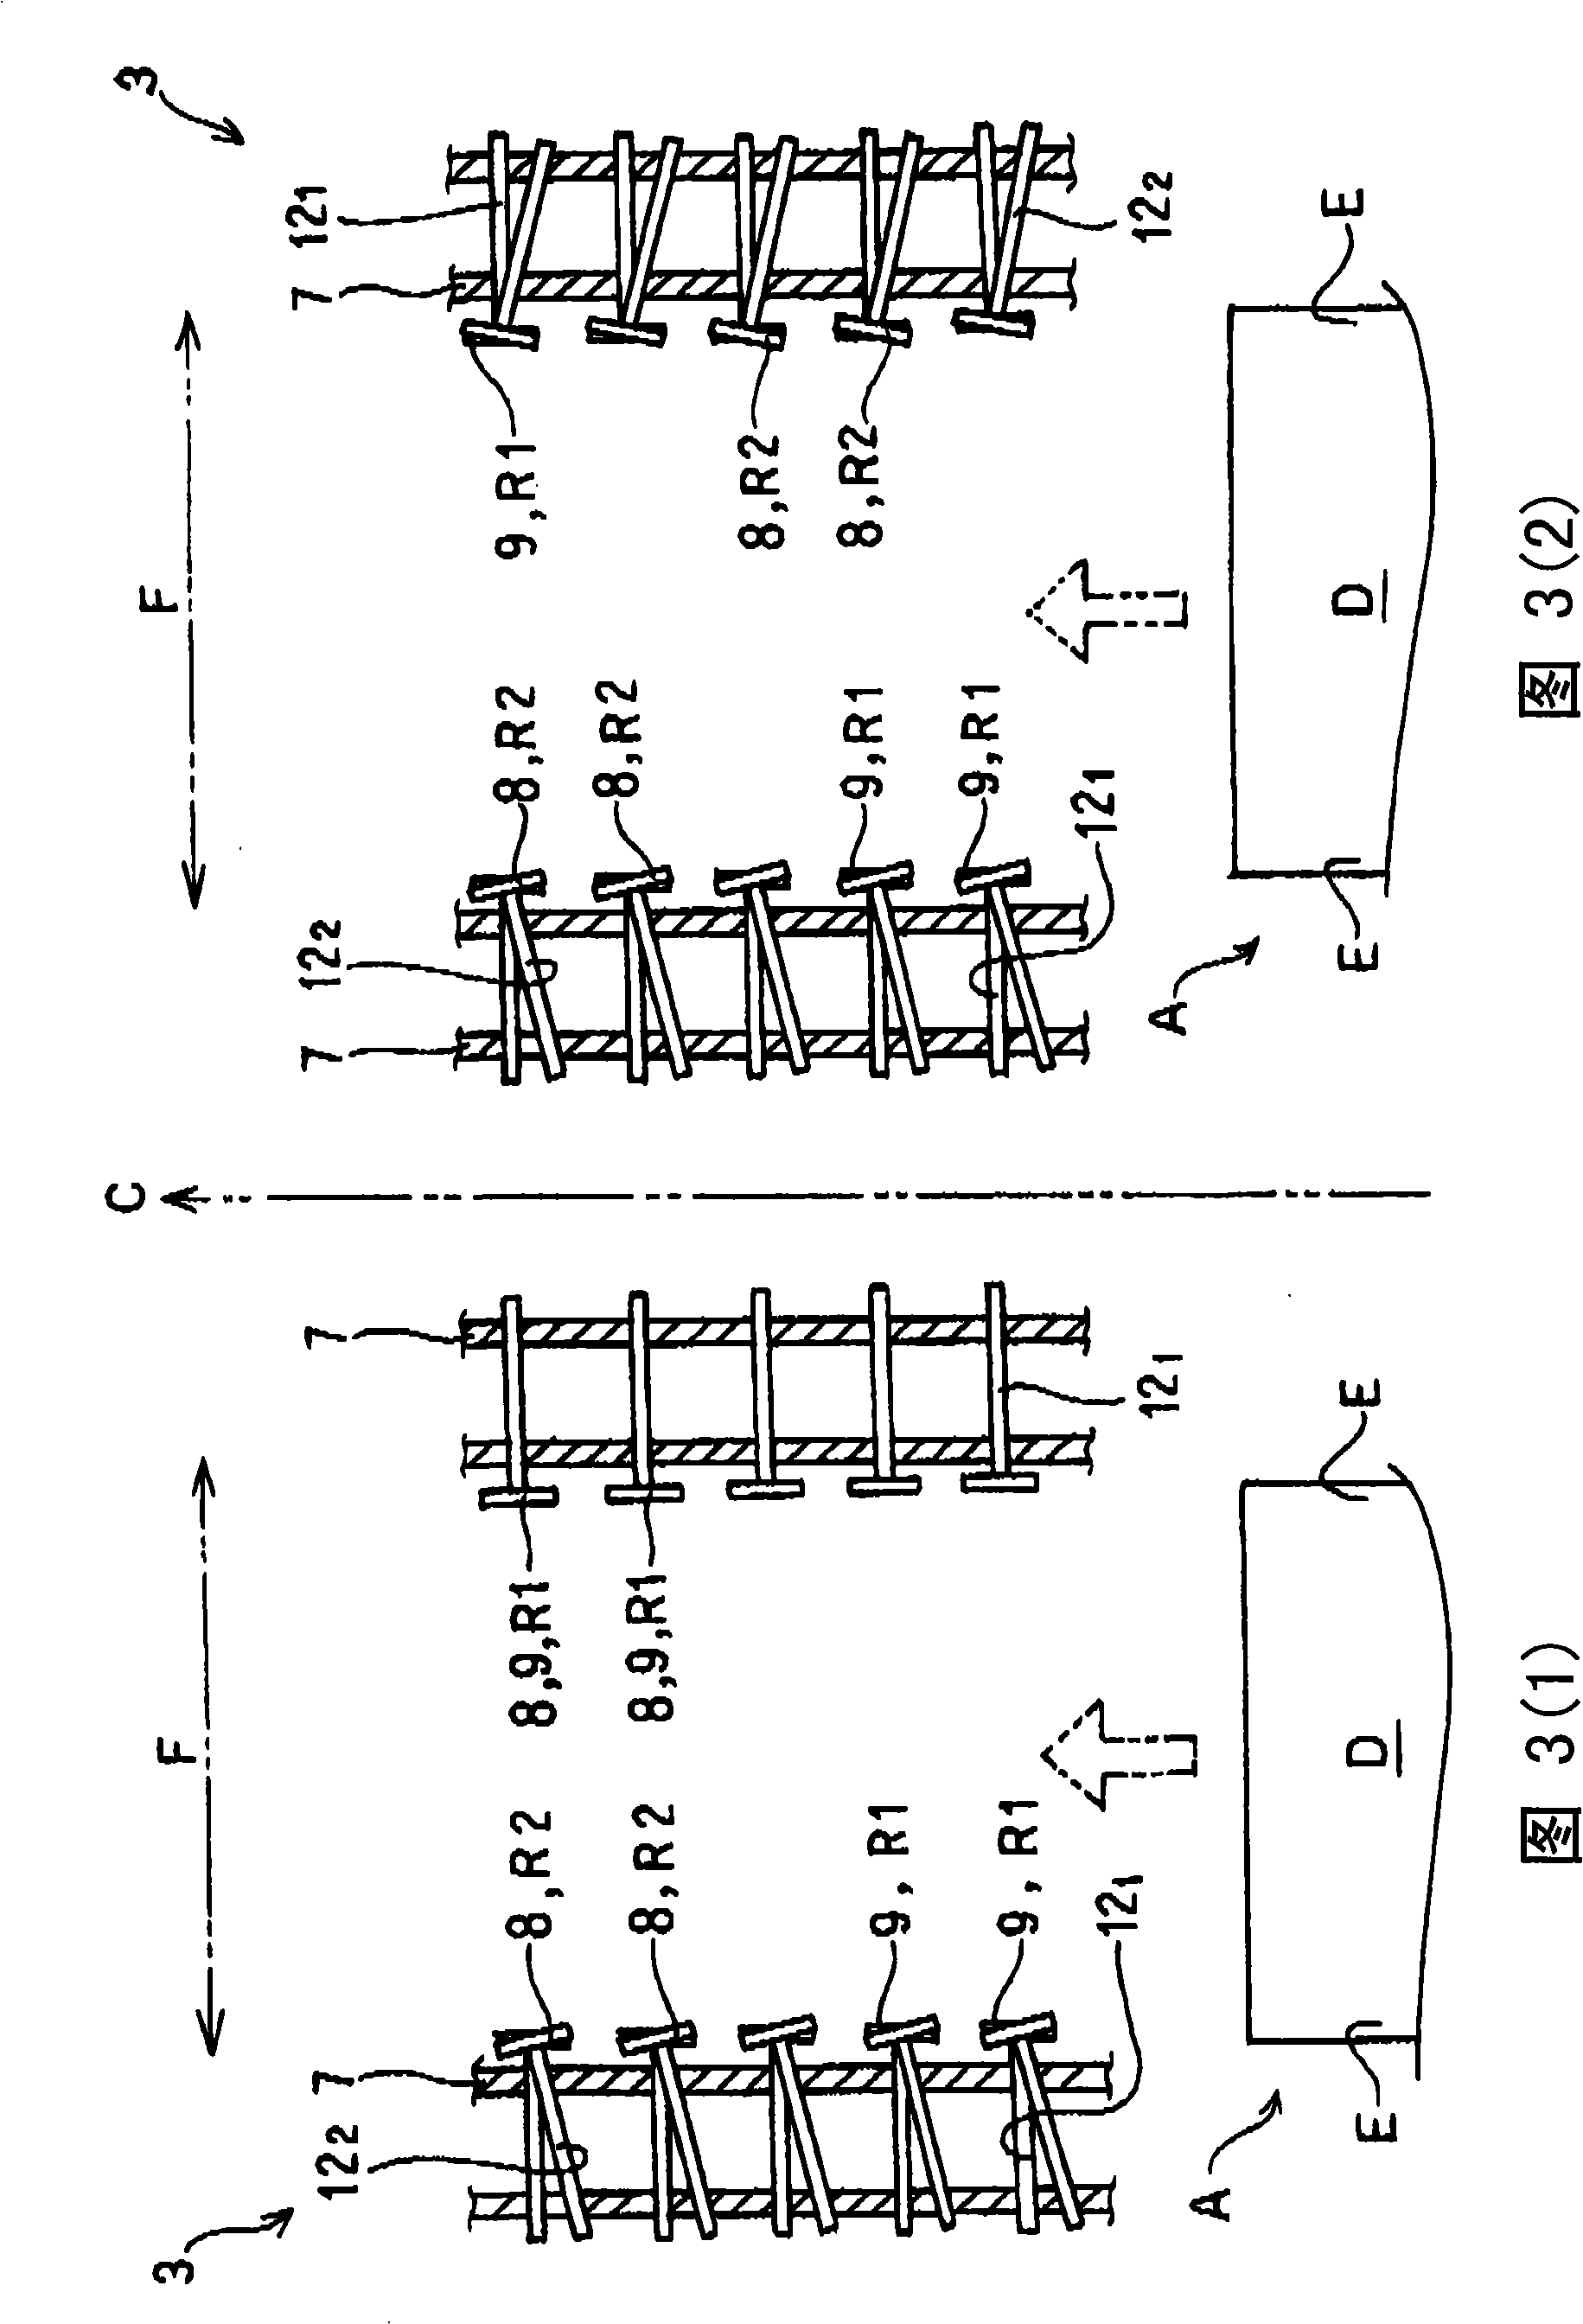 Conveyer belt of substrate material